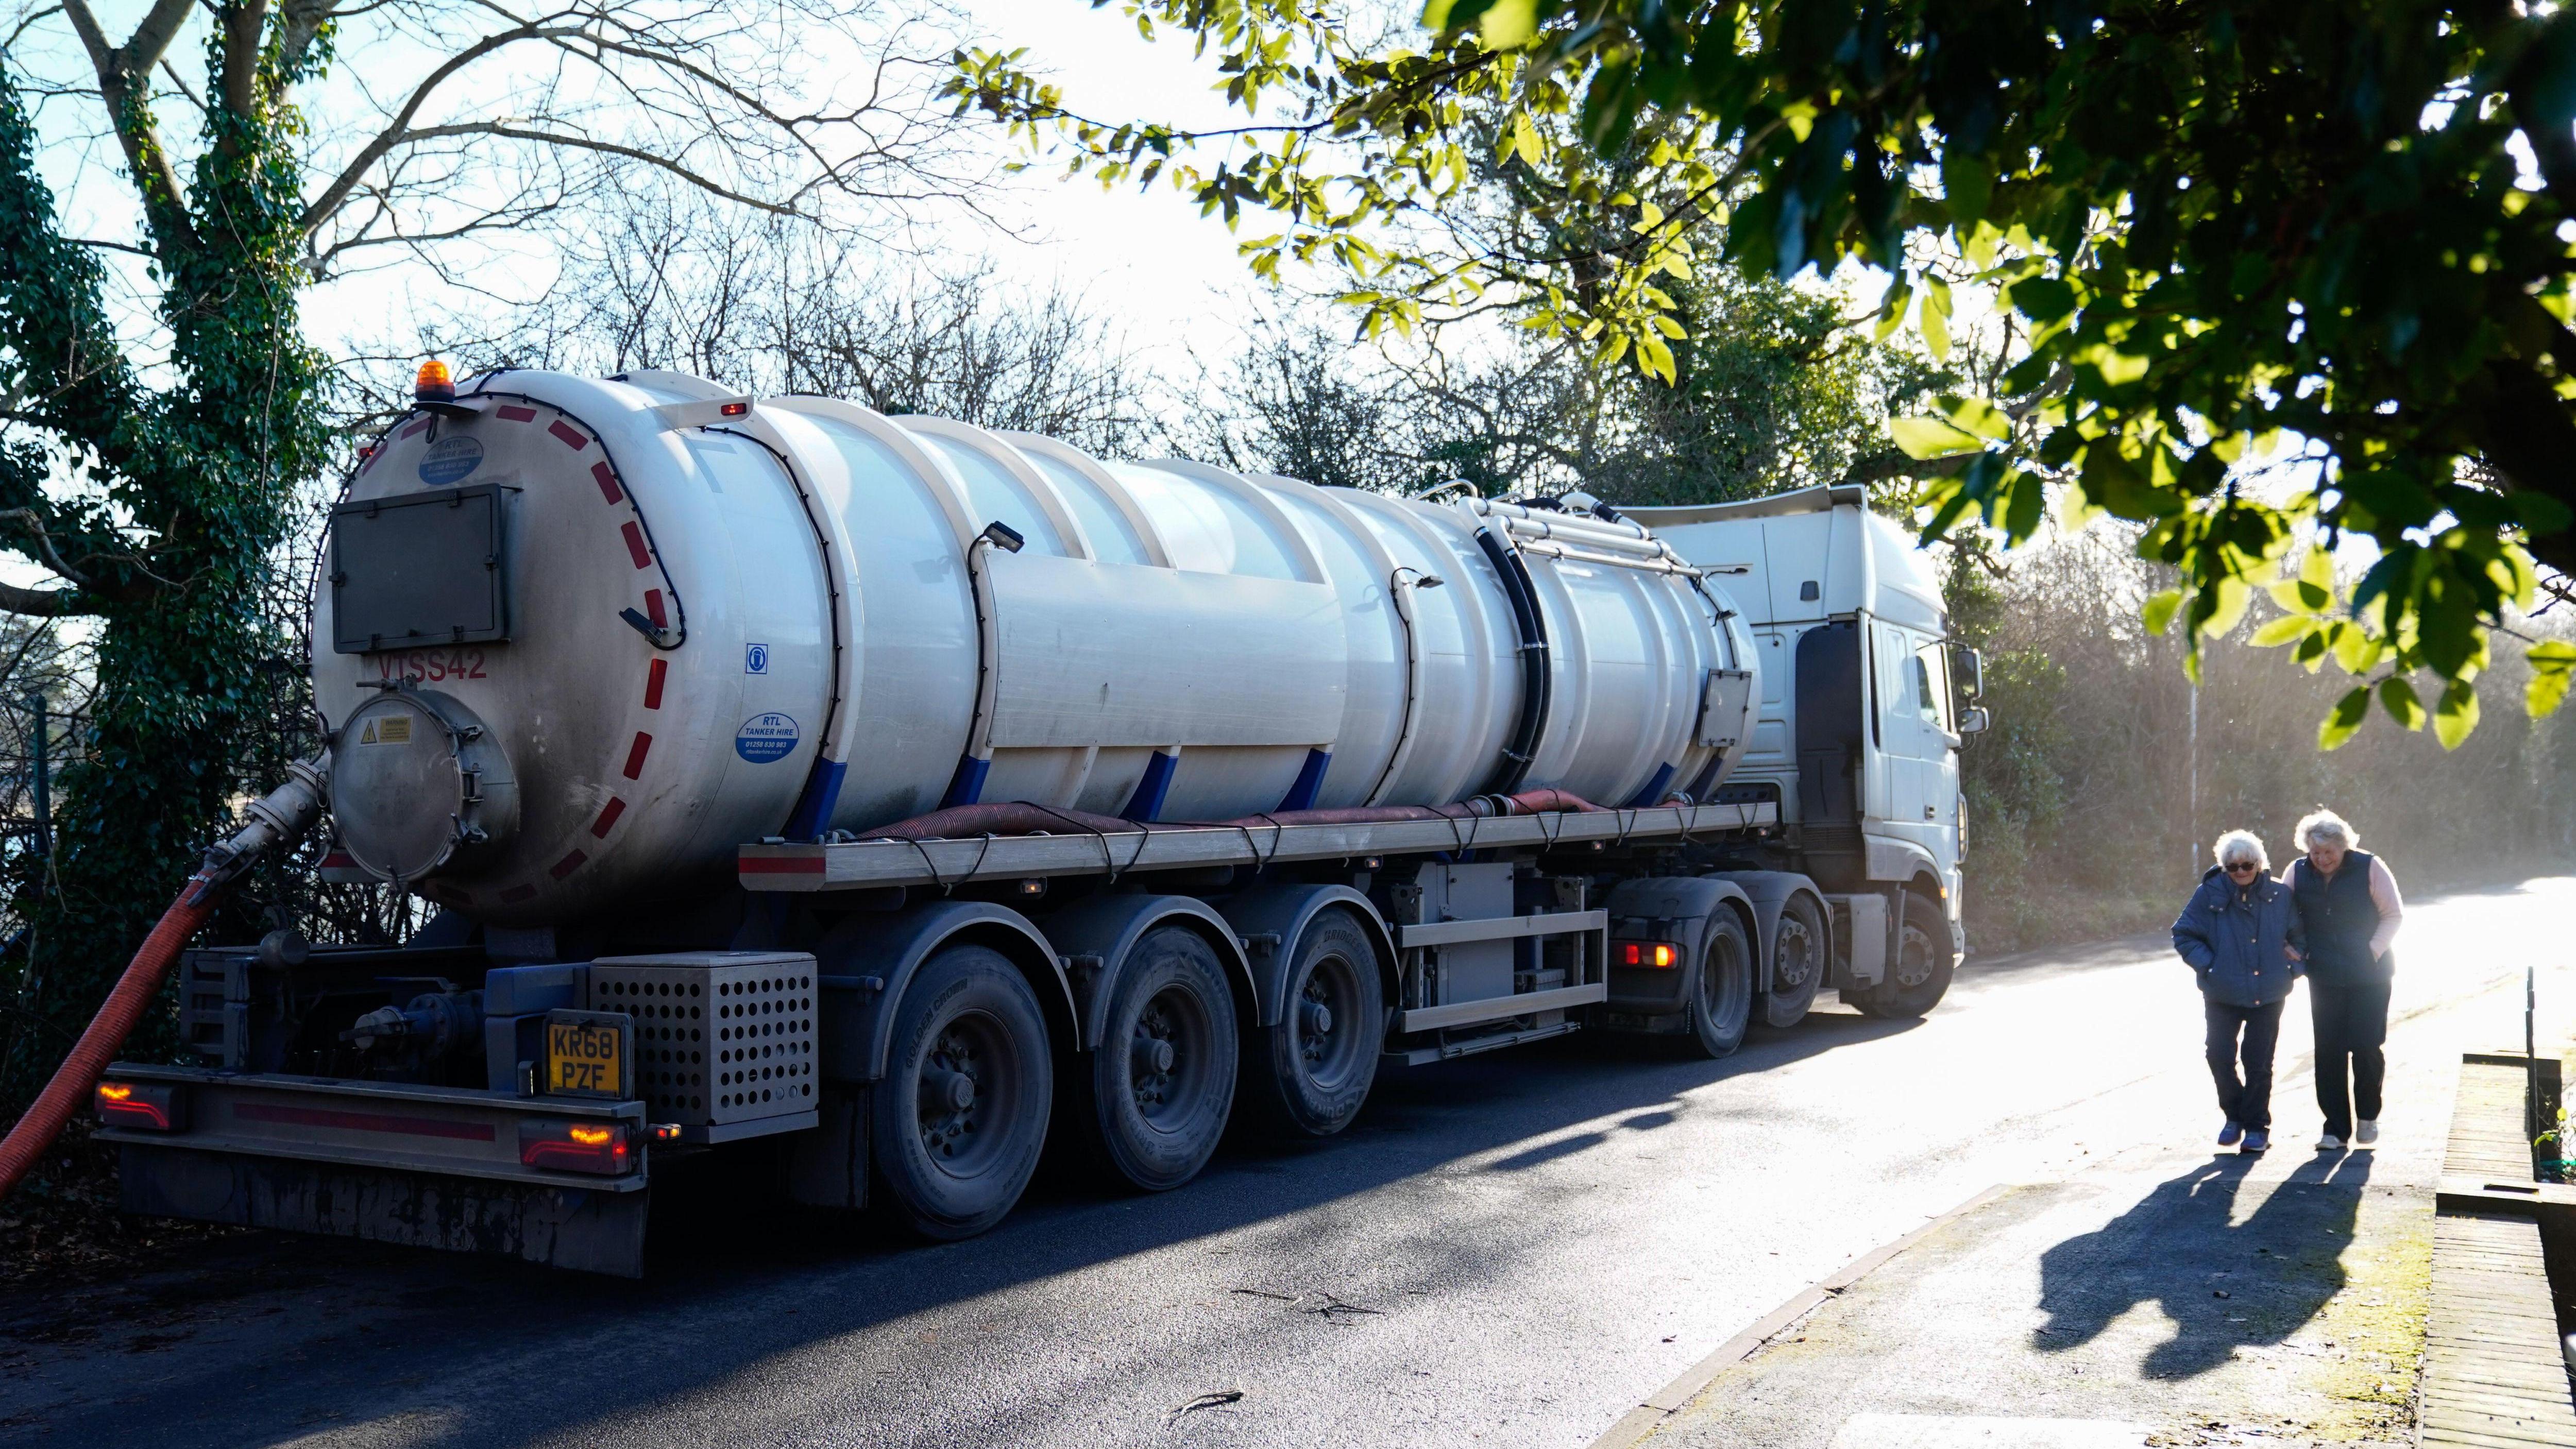 A tanker pumps sewage from the Lightlands Lane treatment station in Cookham, Berkshire. The vehicles are often used to transport sewage from overwhelmed treatment plants to others with more capacity